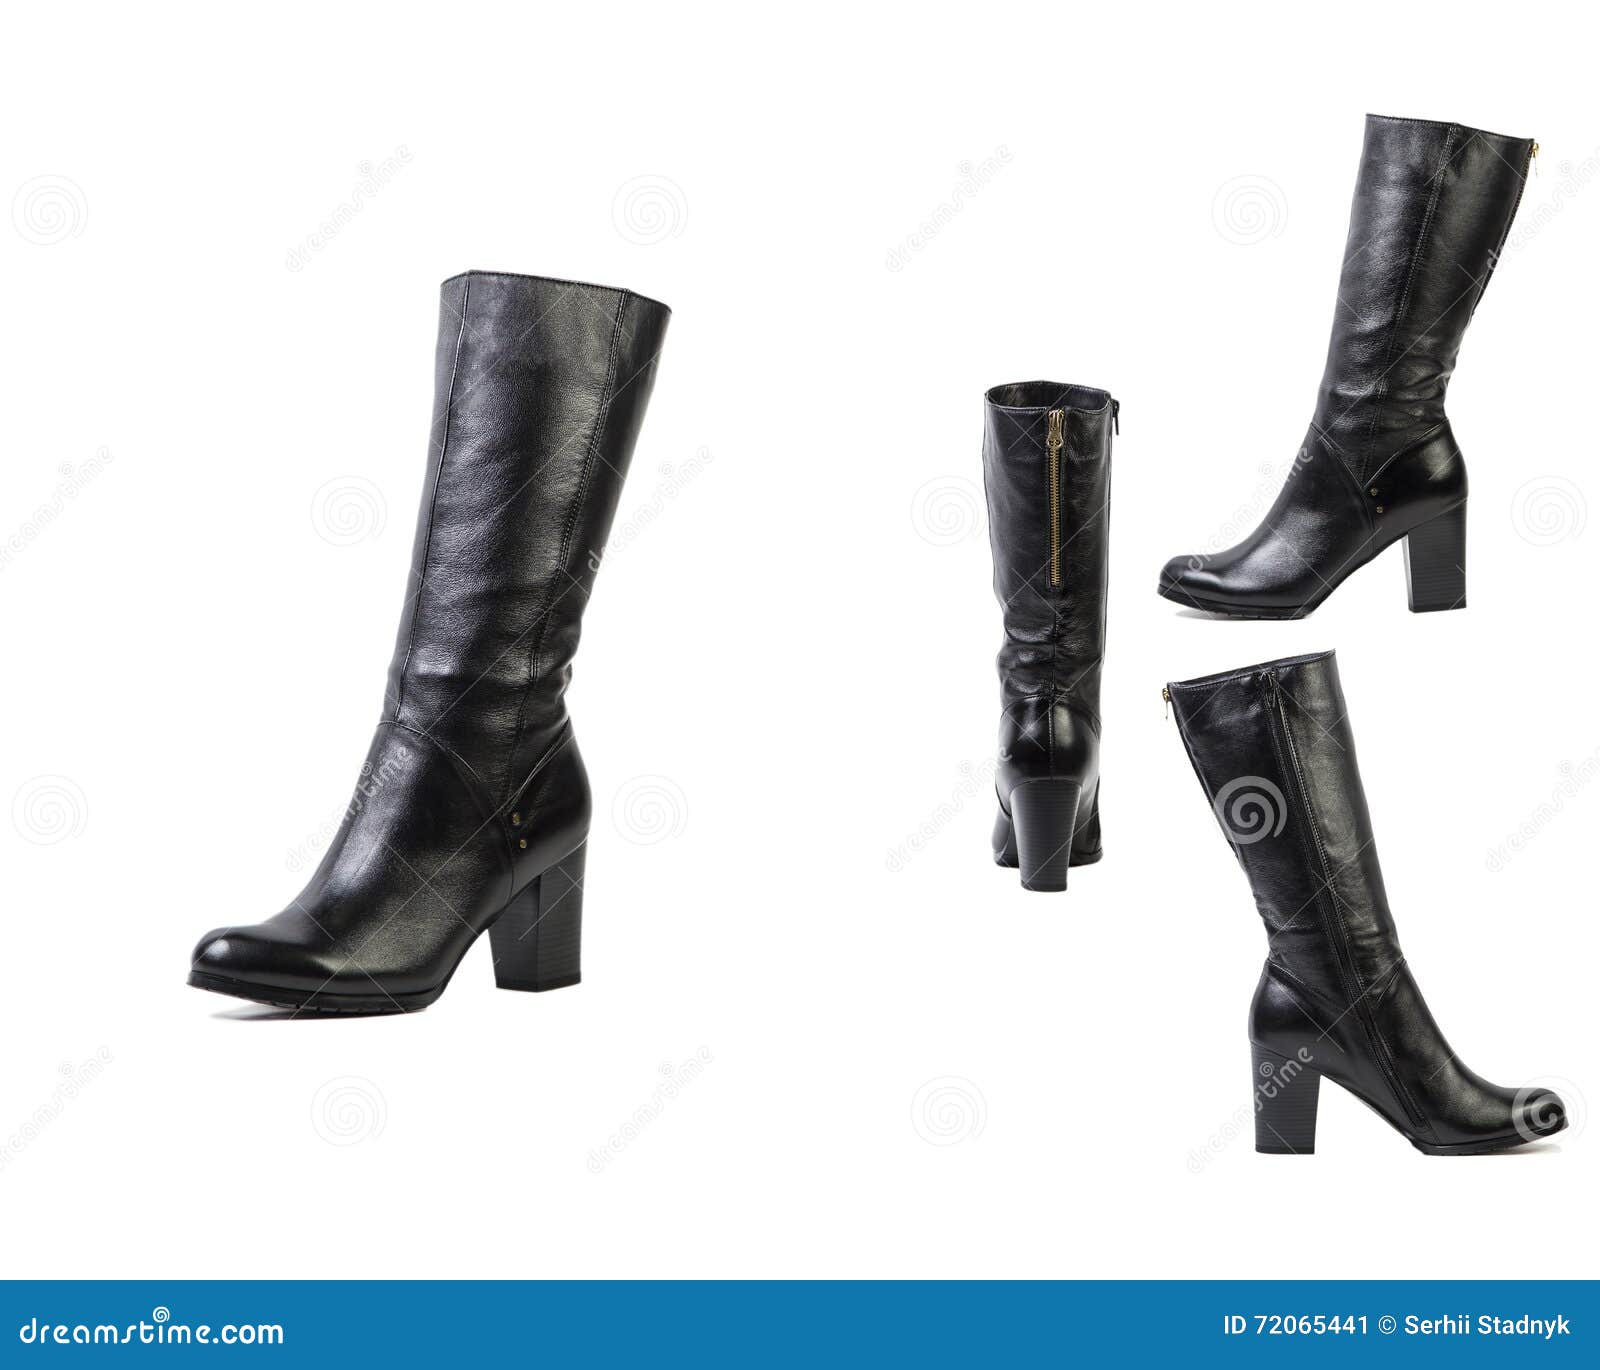 italian leather boots women's shoes